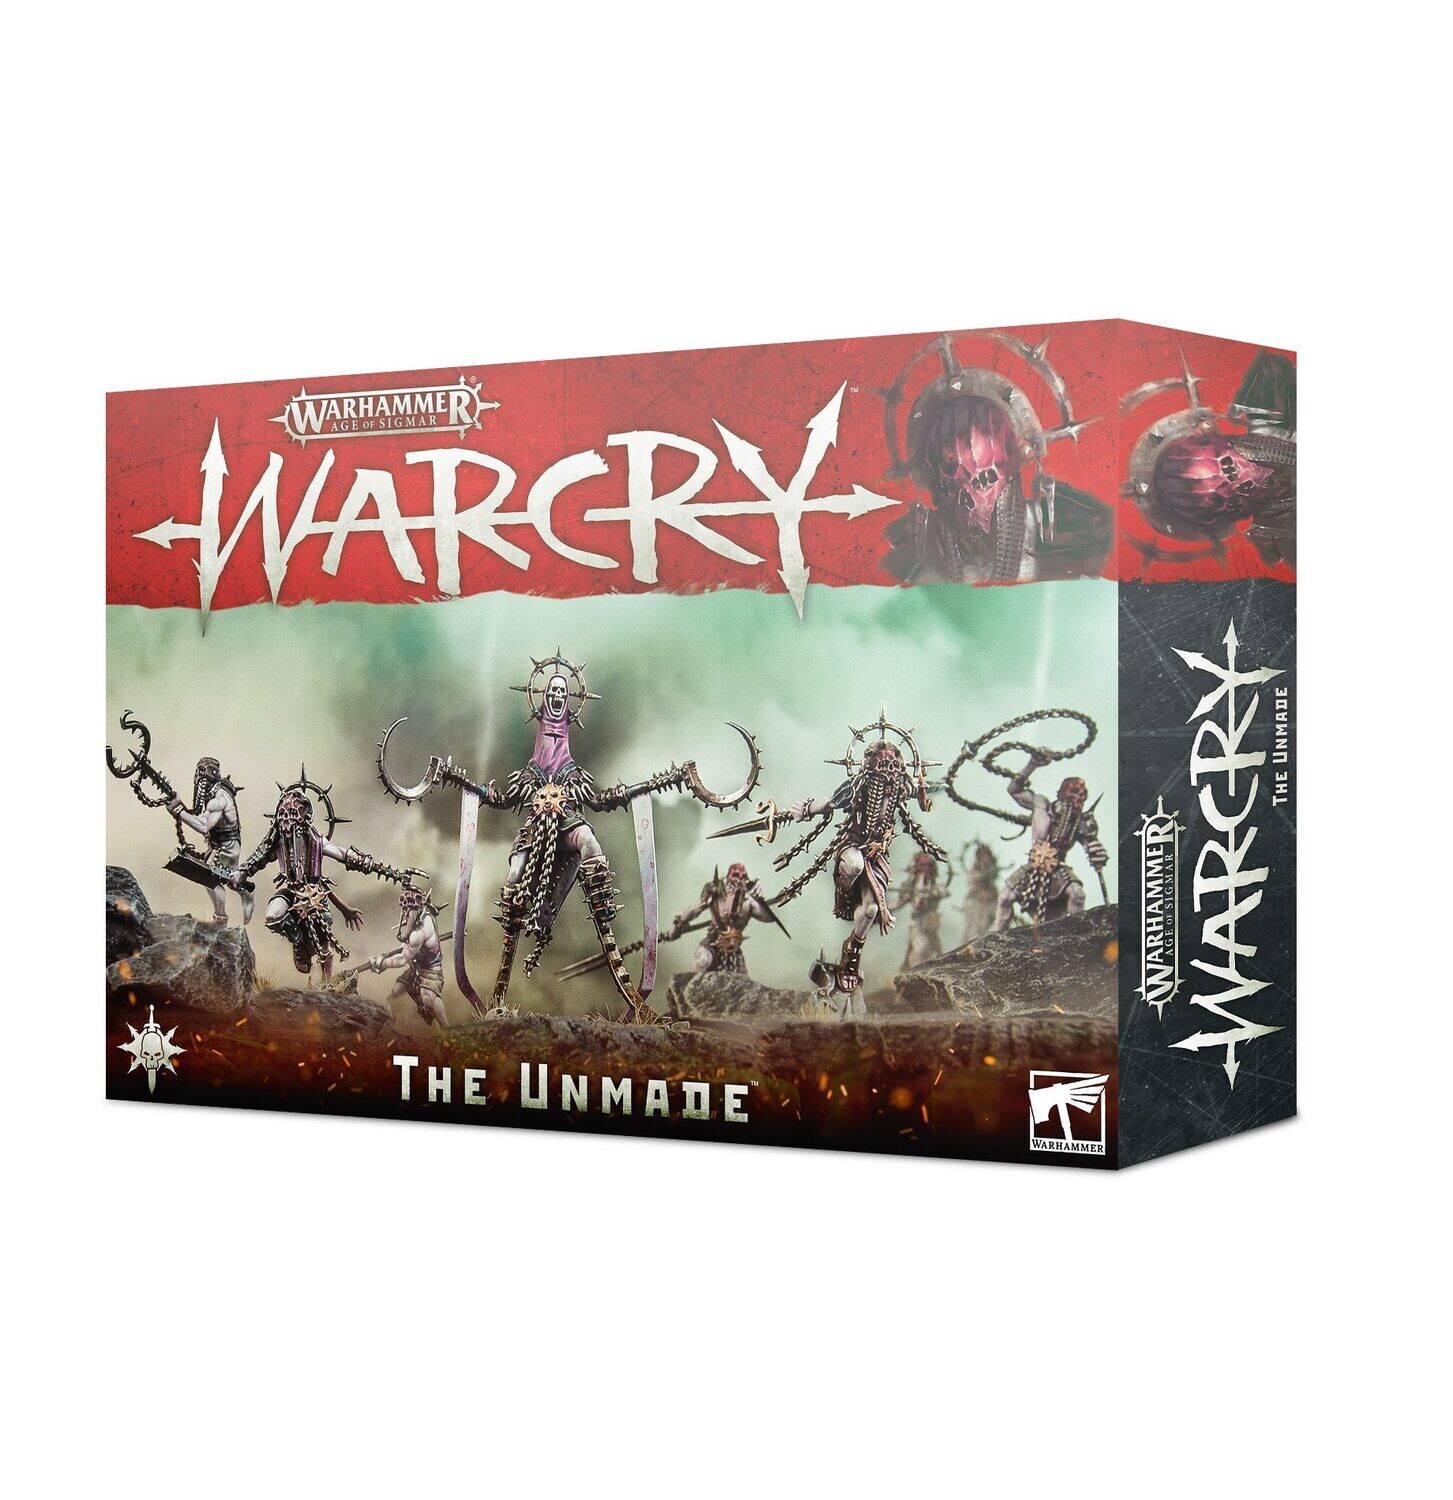 111-12 Warcry: The Unmade